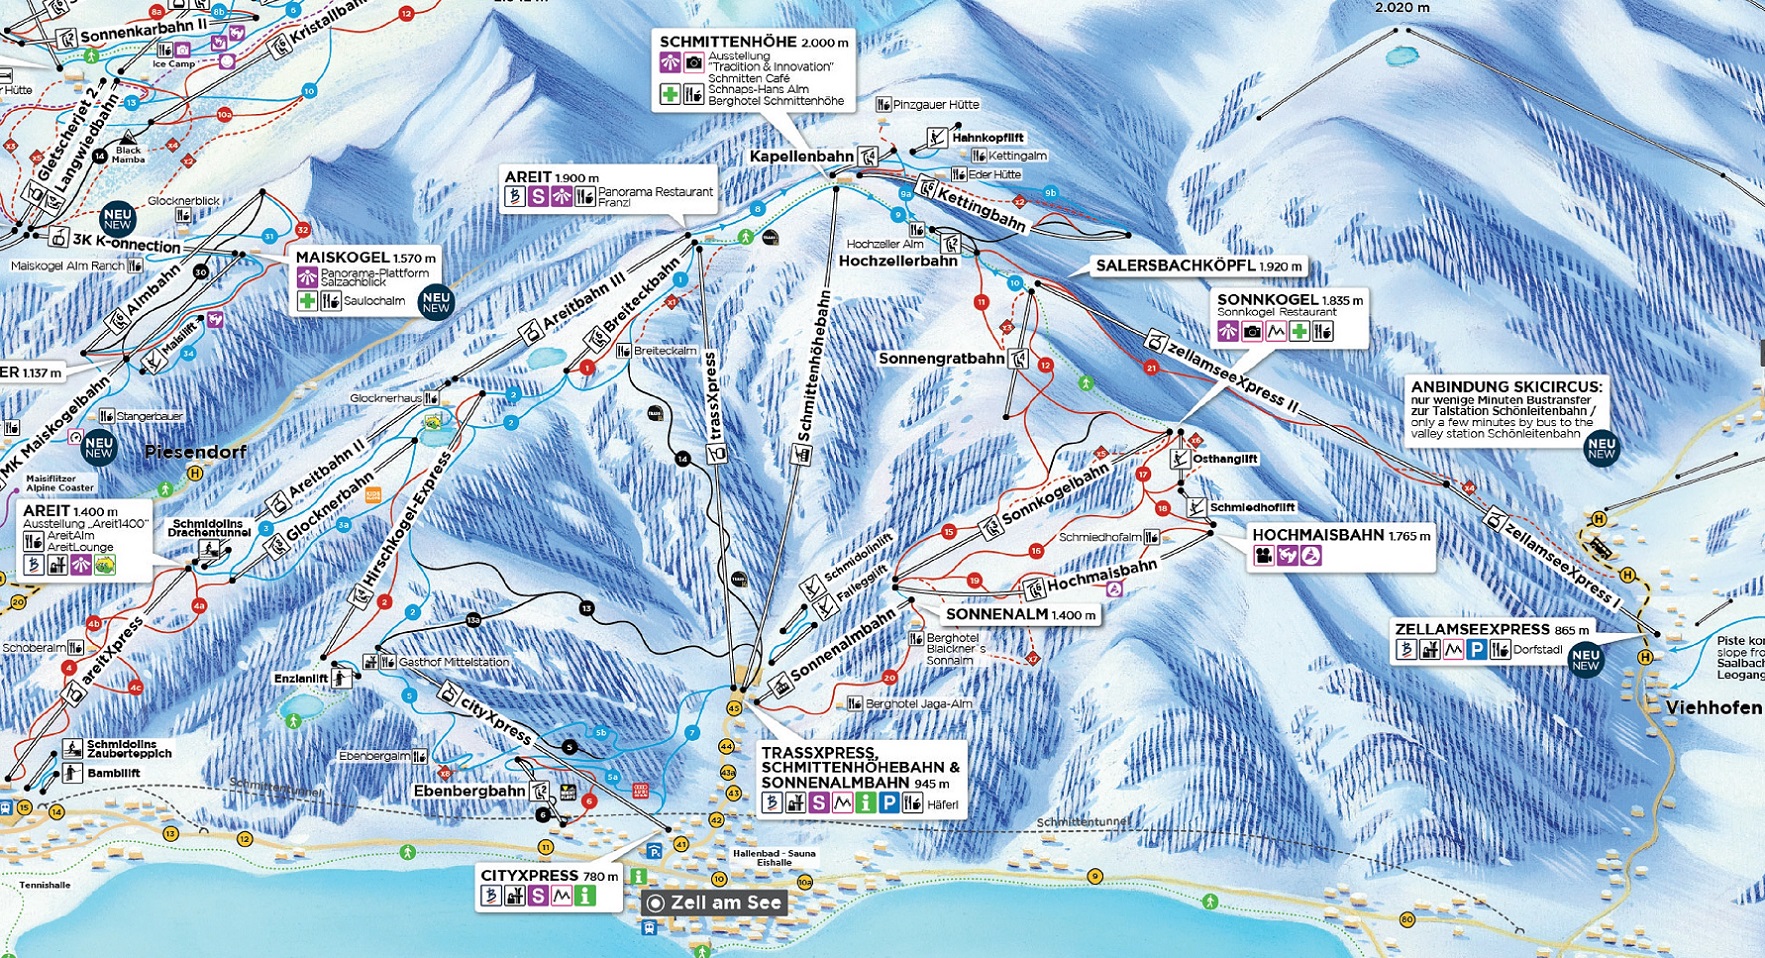 Hotels in Zell am Main map, Zell am Main map, Zell am Main tourism, Attractions, Hotels, City Layout, Subway